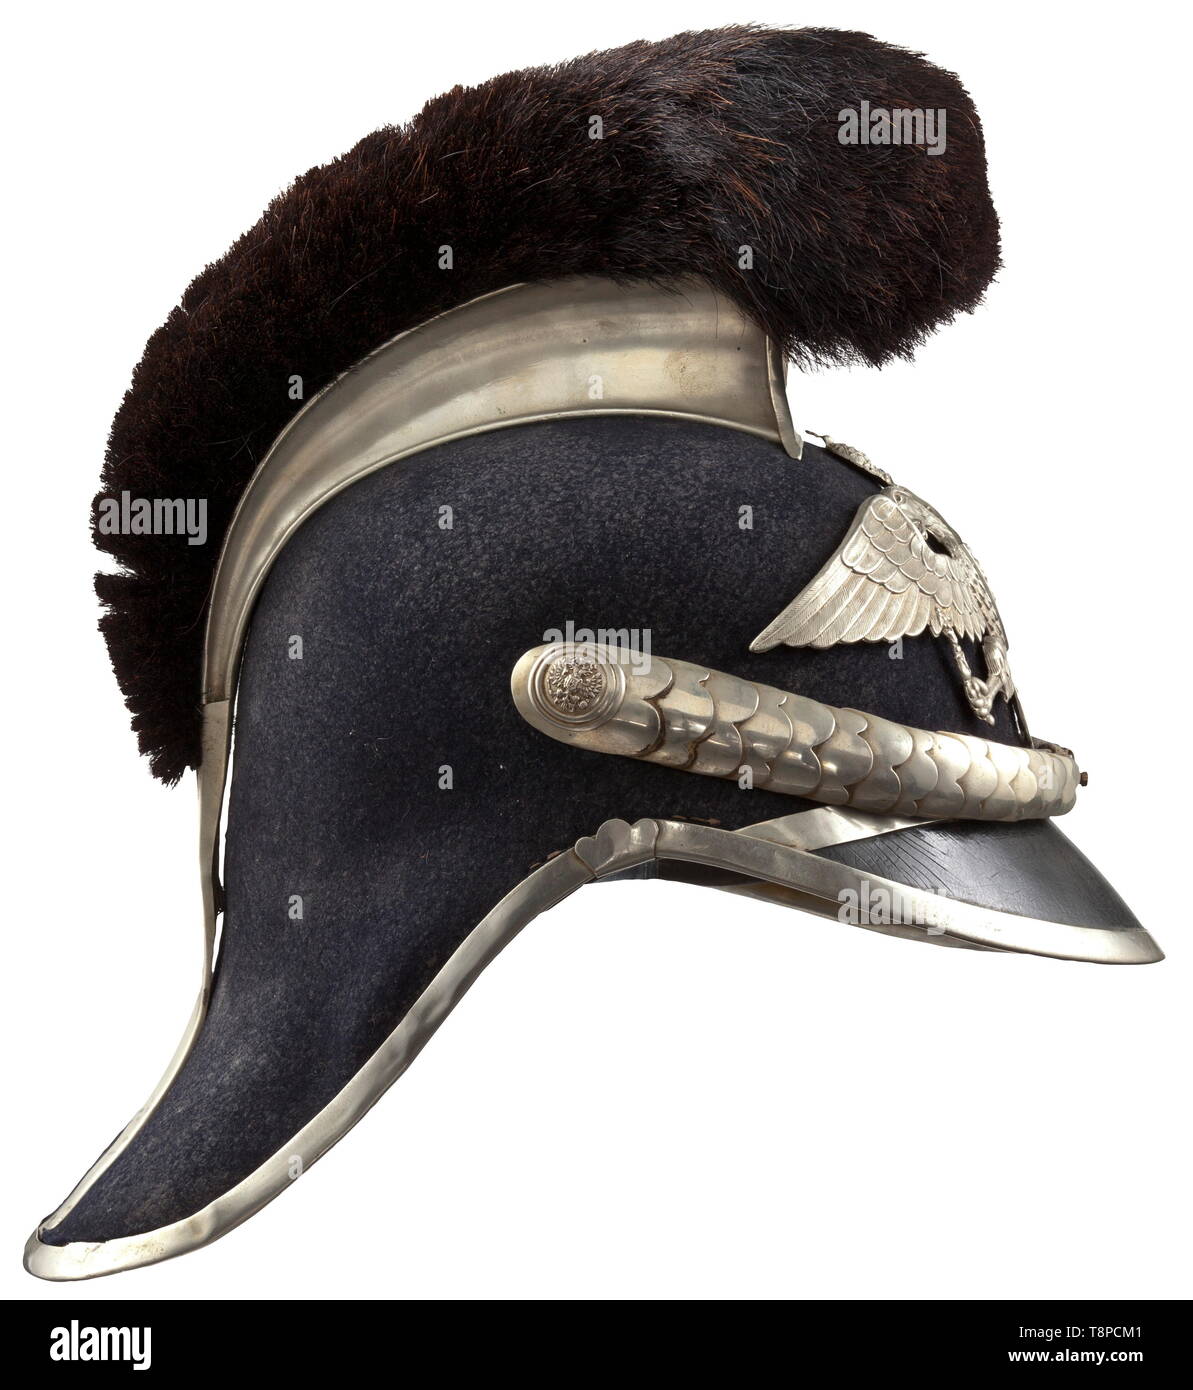 A Russian helmet for the Special Corps of the mounted country, fortress, division and railway police, from 1911 onwards Felt body, leather front visor, silver-coloured comb with horsehair crest, leather-backed chinscales, rosettes with the tsarist double-headed eagle. Applied, silver-plated double-headed eagle. Leather sweatband. Good condition. historic, historical, 20th century, Additional-Rights-Clearance-Info-Not-Available Stock Photo